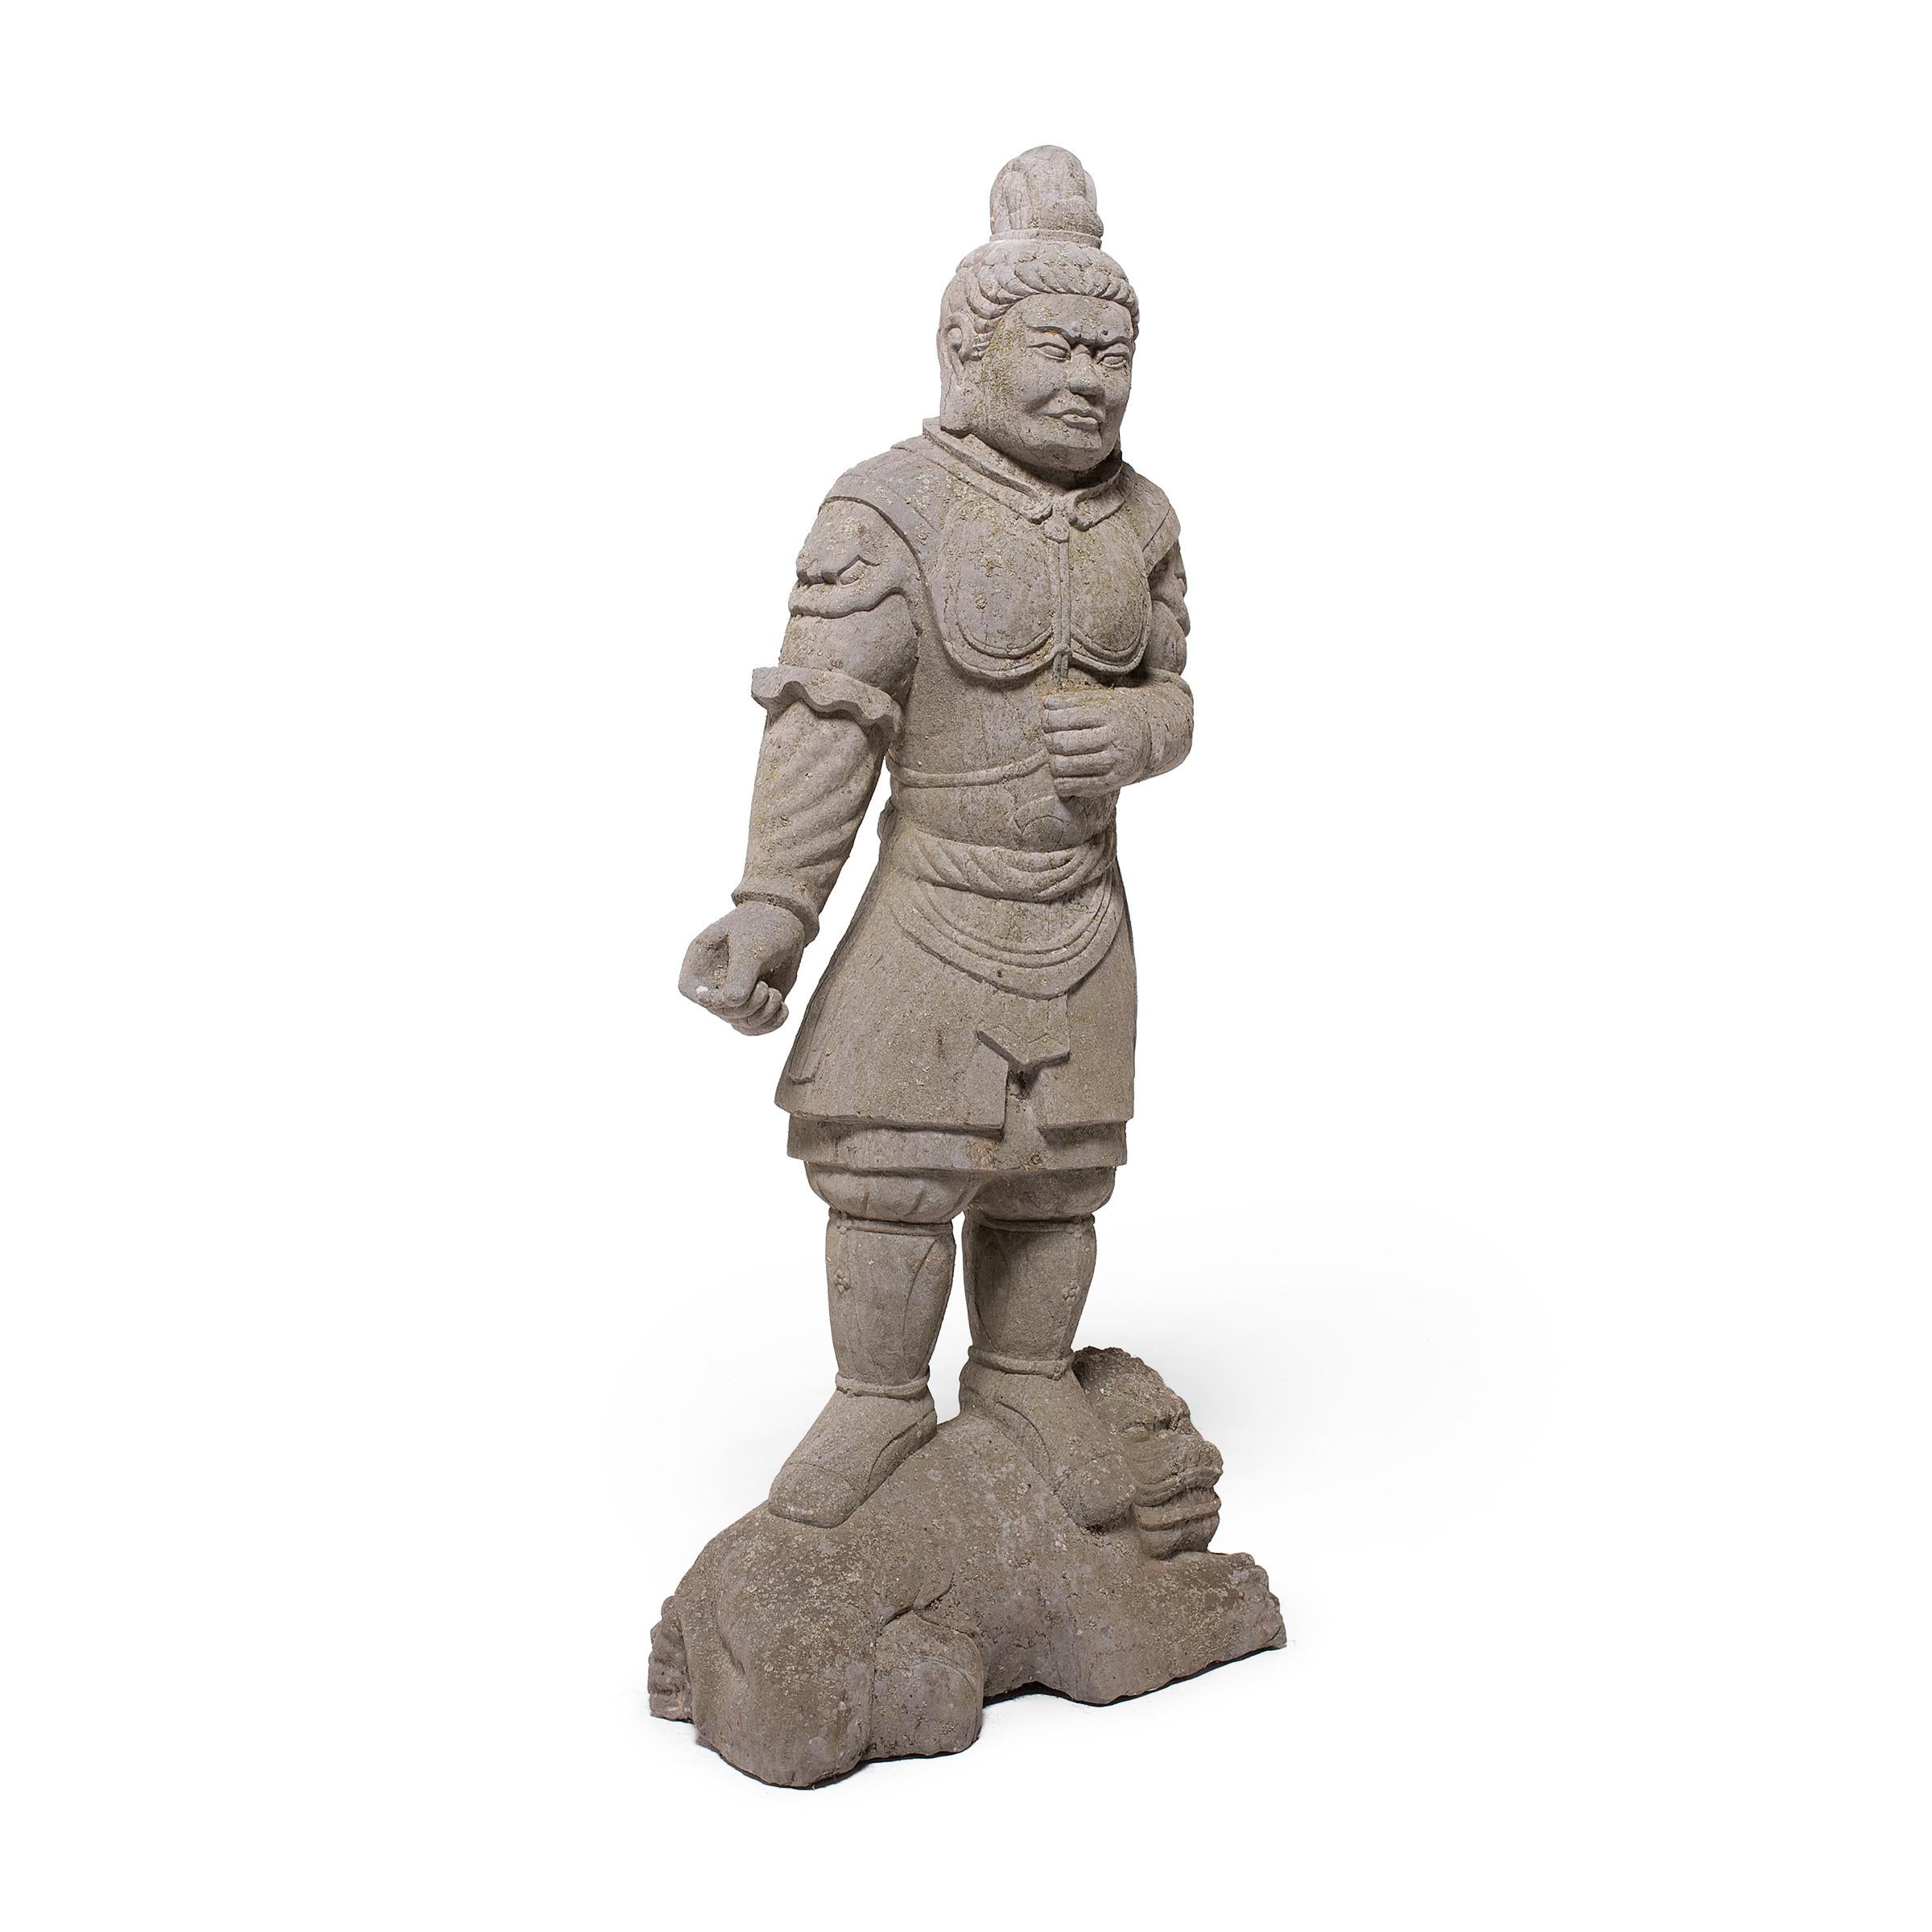 This hand-carved stone statue depicts a fearsome Chinese warrior or general, clad in armor with a chest plate and fu dog sleeves. He stands atop a reclining fu dog, or shizi, a posture that symbolizes dominion over the universe. The fu dog is simply